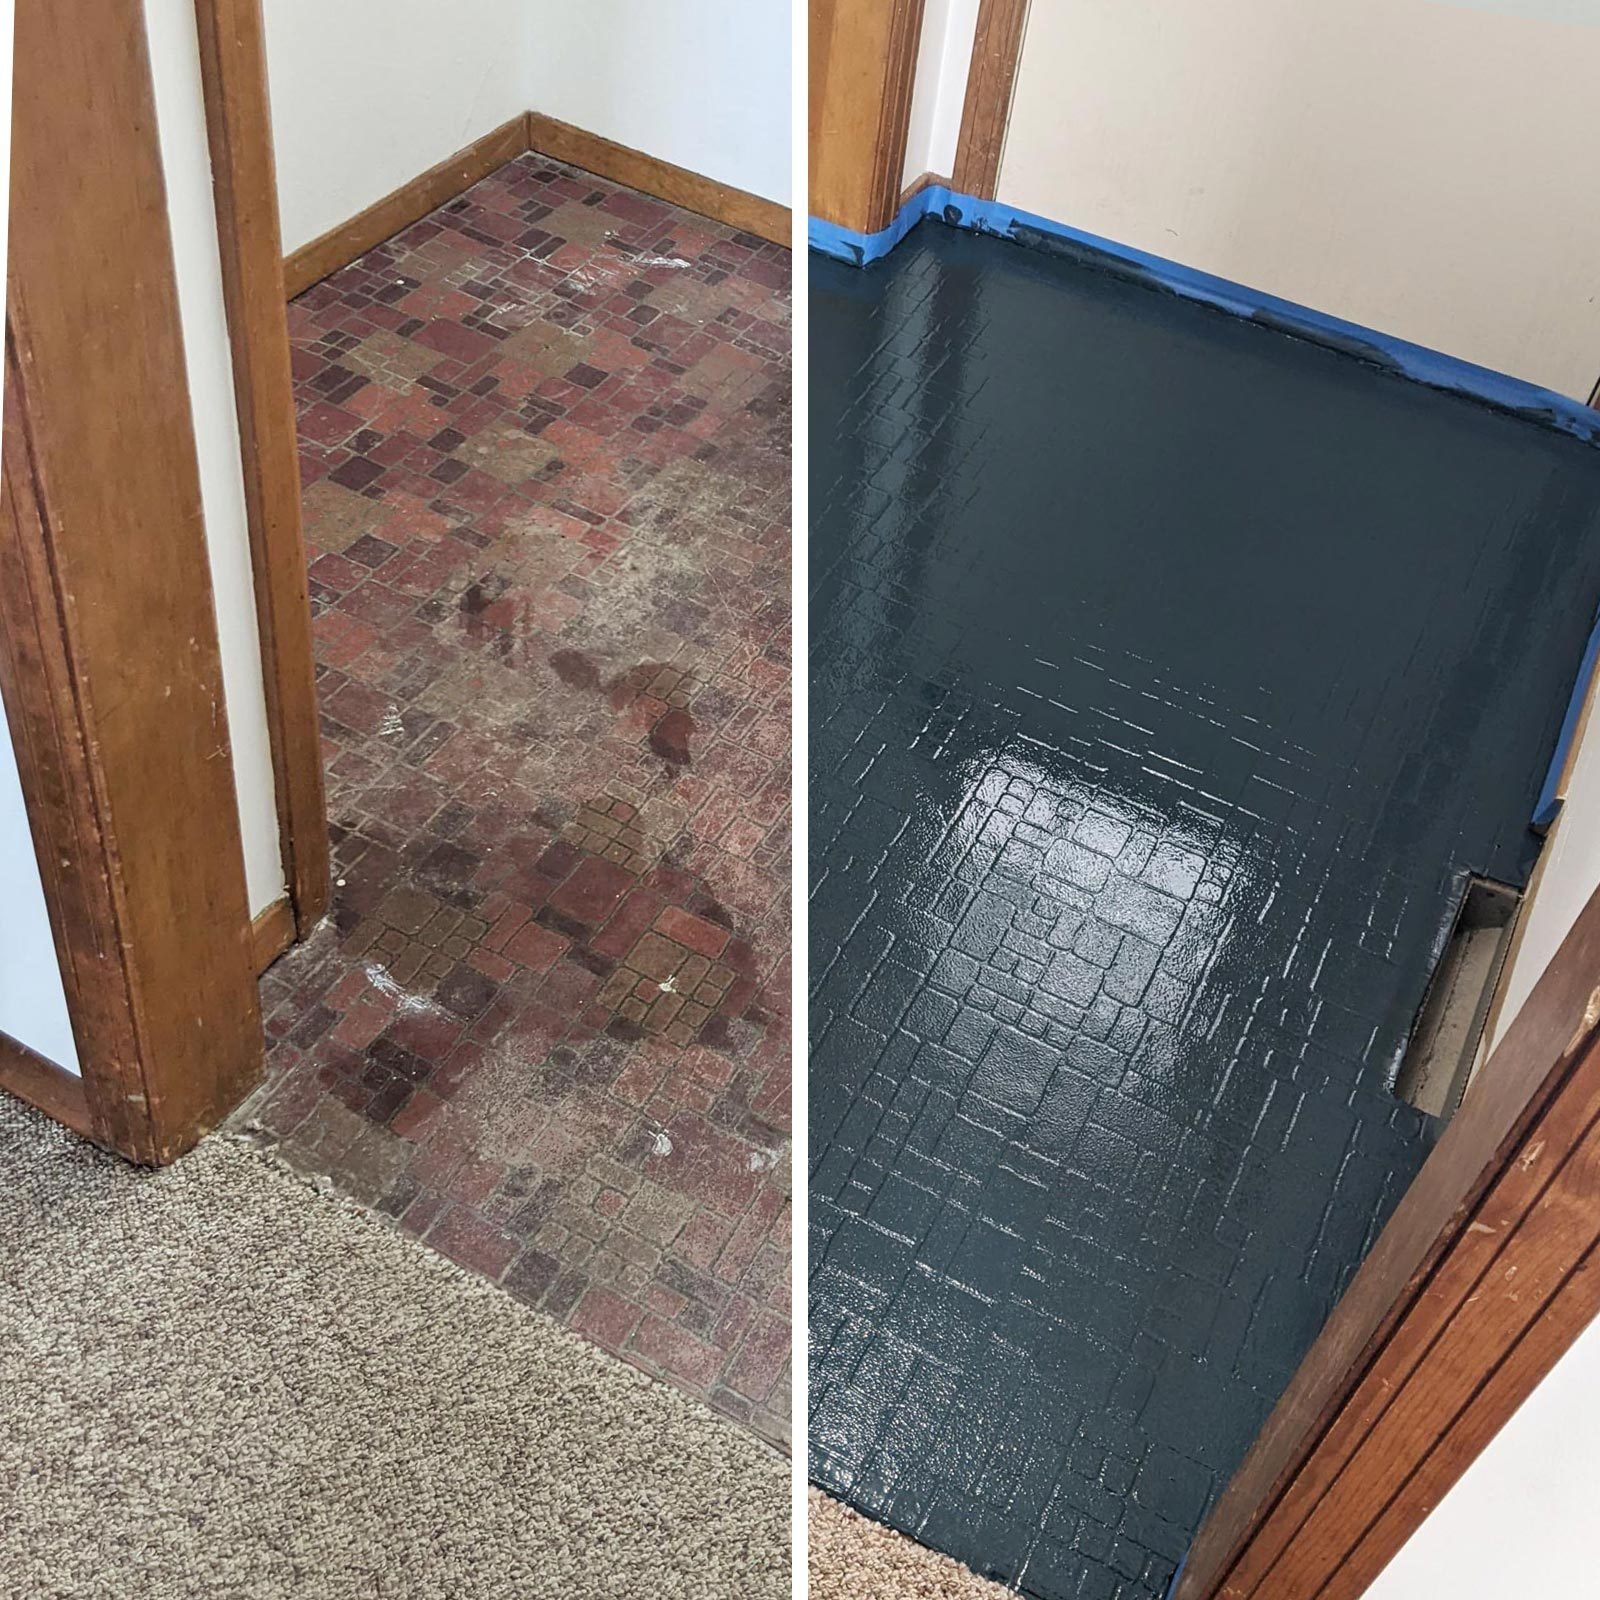 How to remove double sided carpet tape on linoleum kitchen floor?